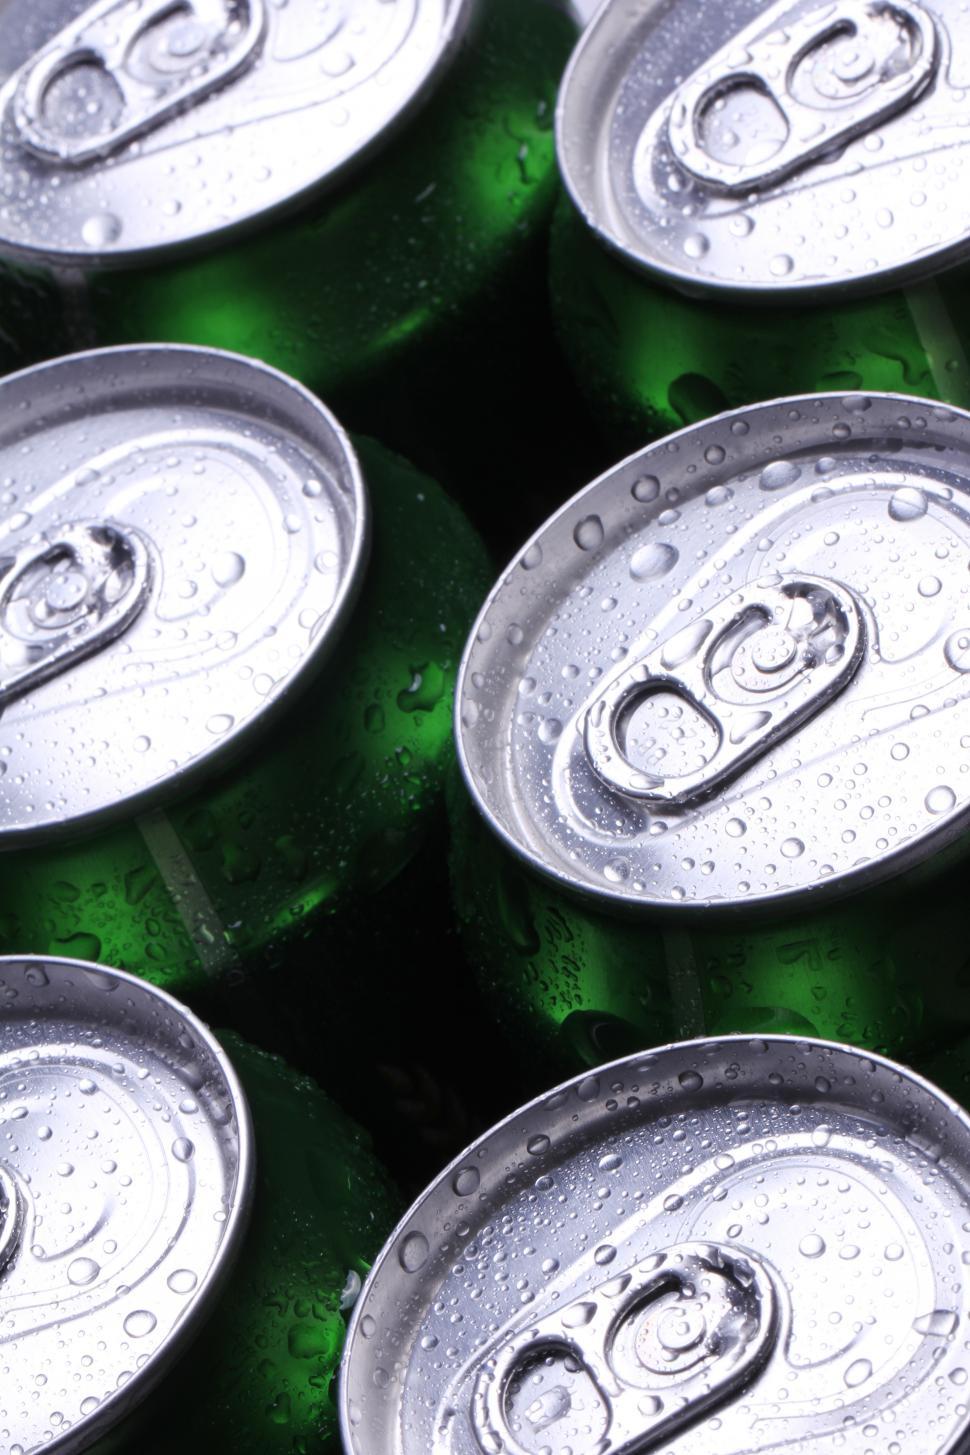 Download Free Stock Photo of Tops of aluminum cans filled with cold drink 